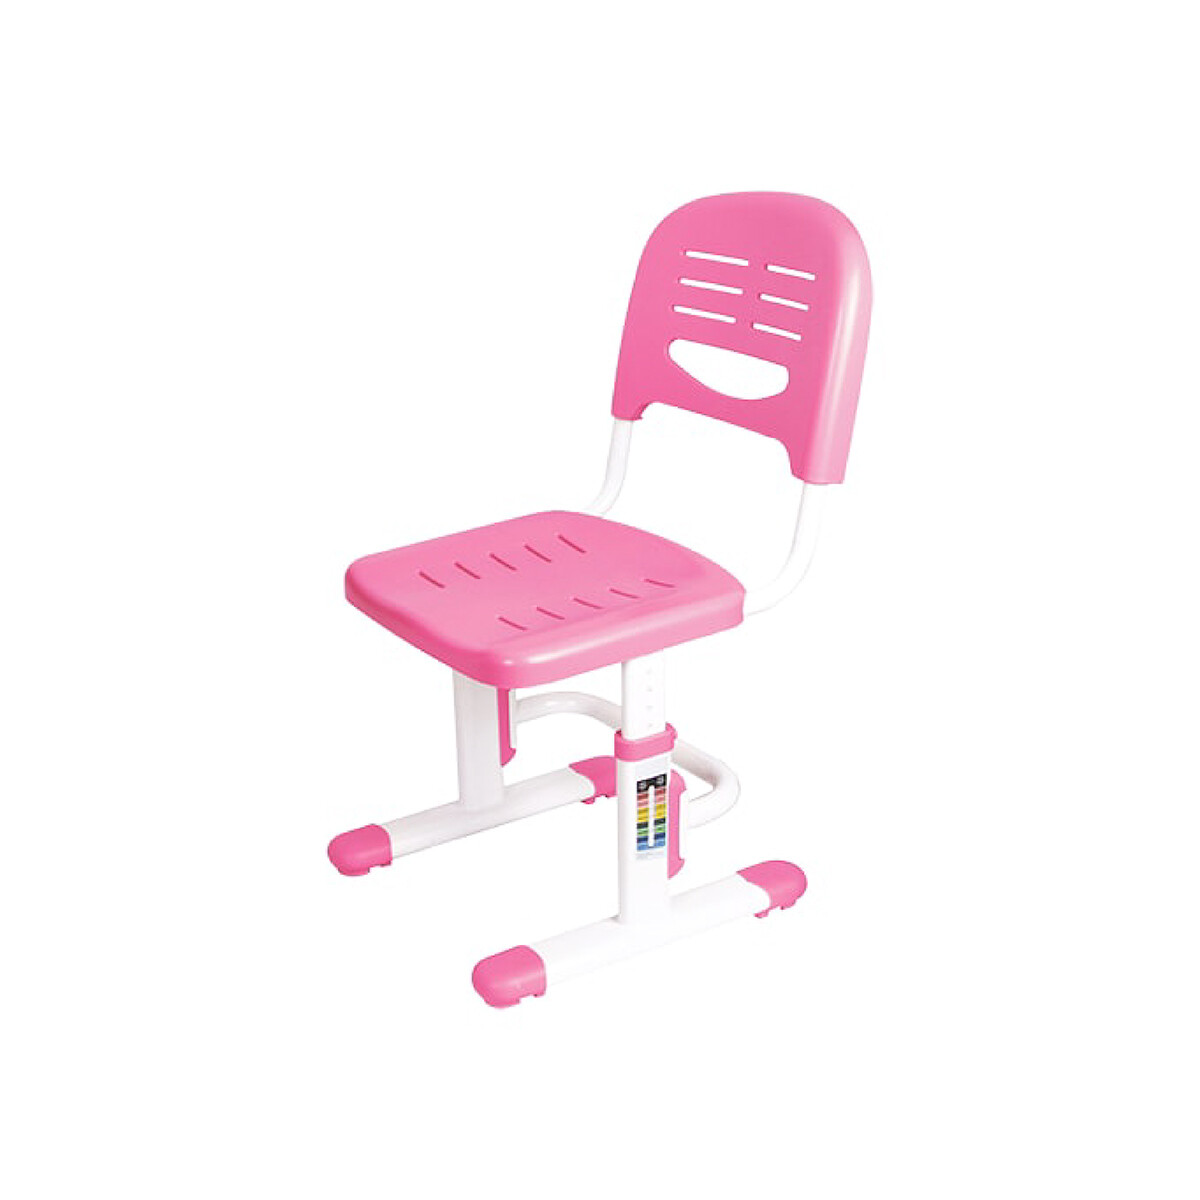 Kidomate Advanced Study Chair for Kids - Pink